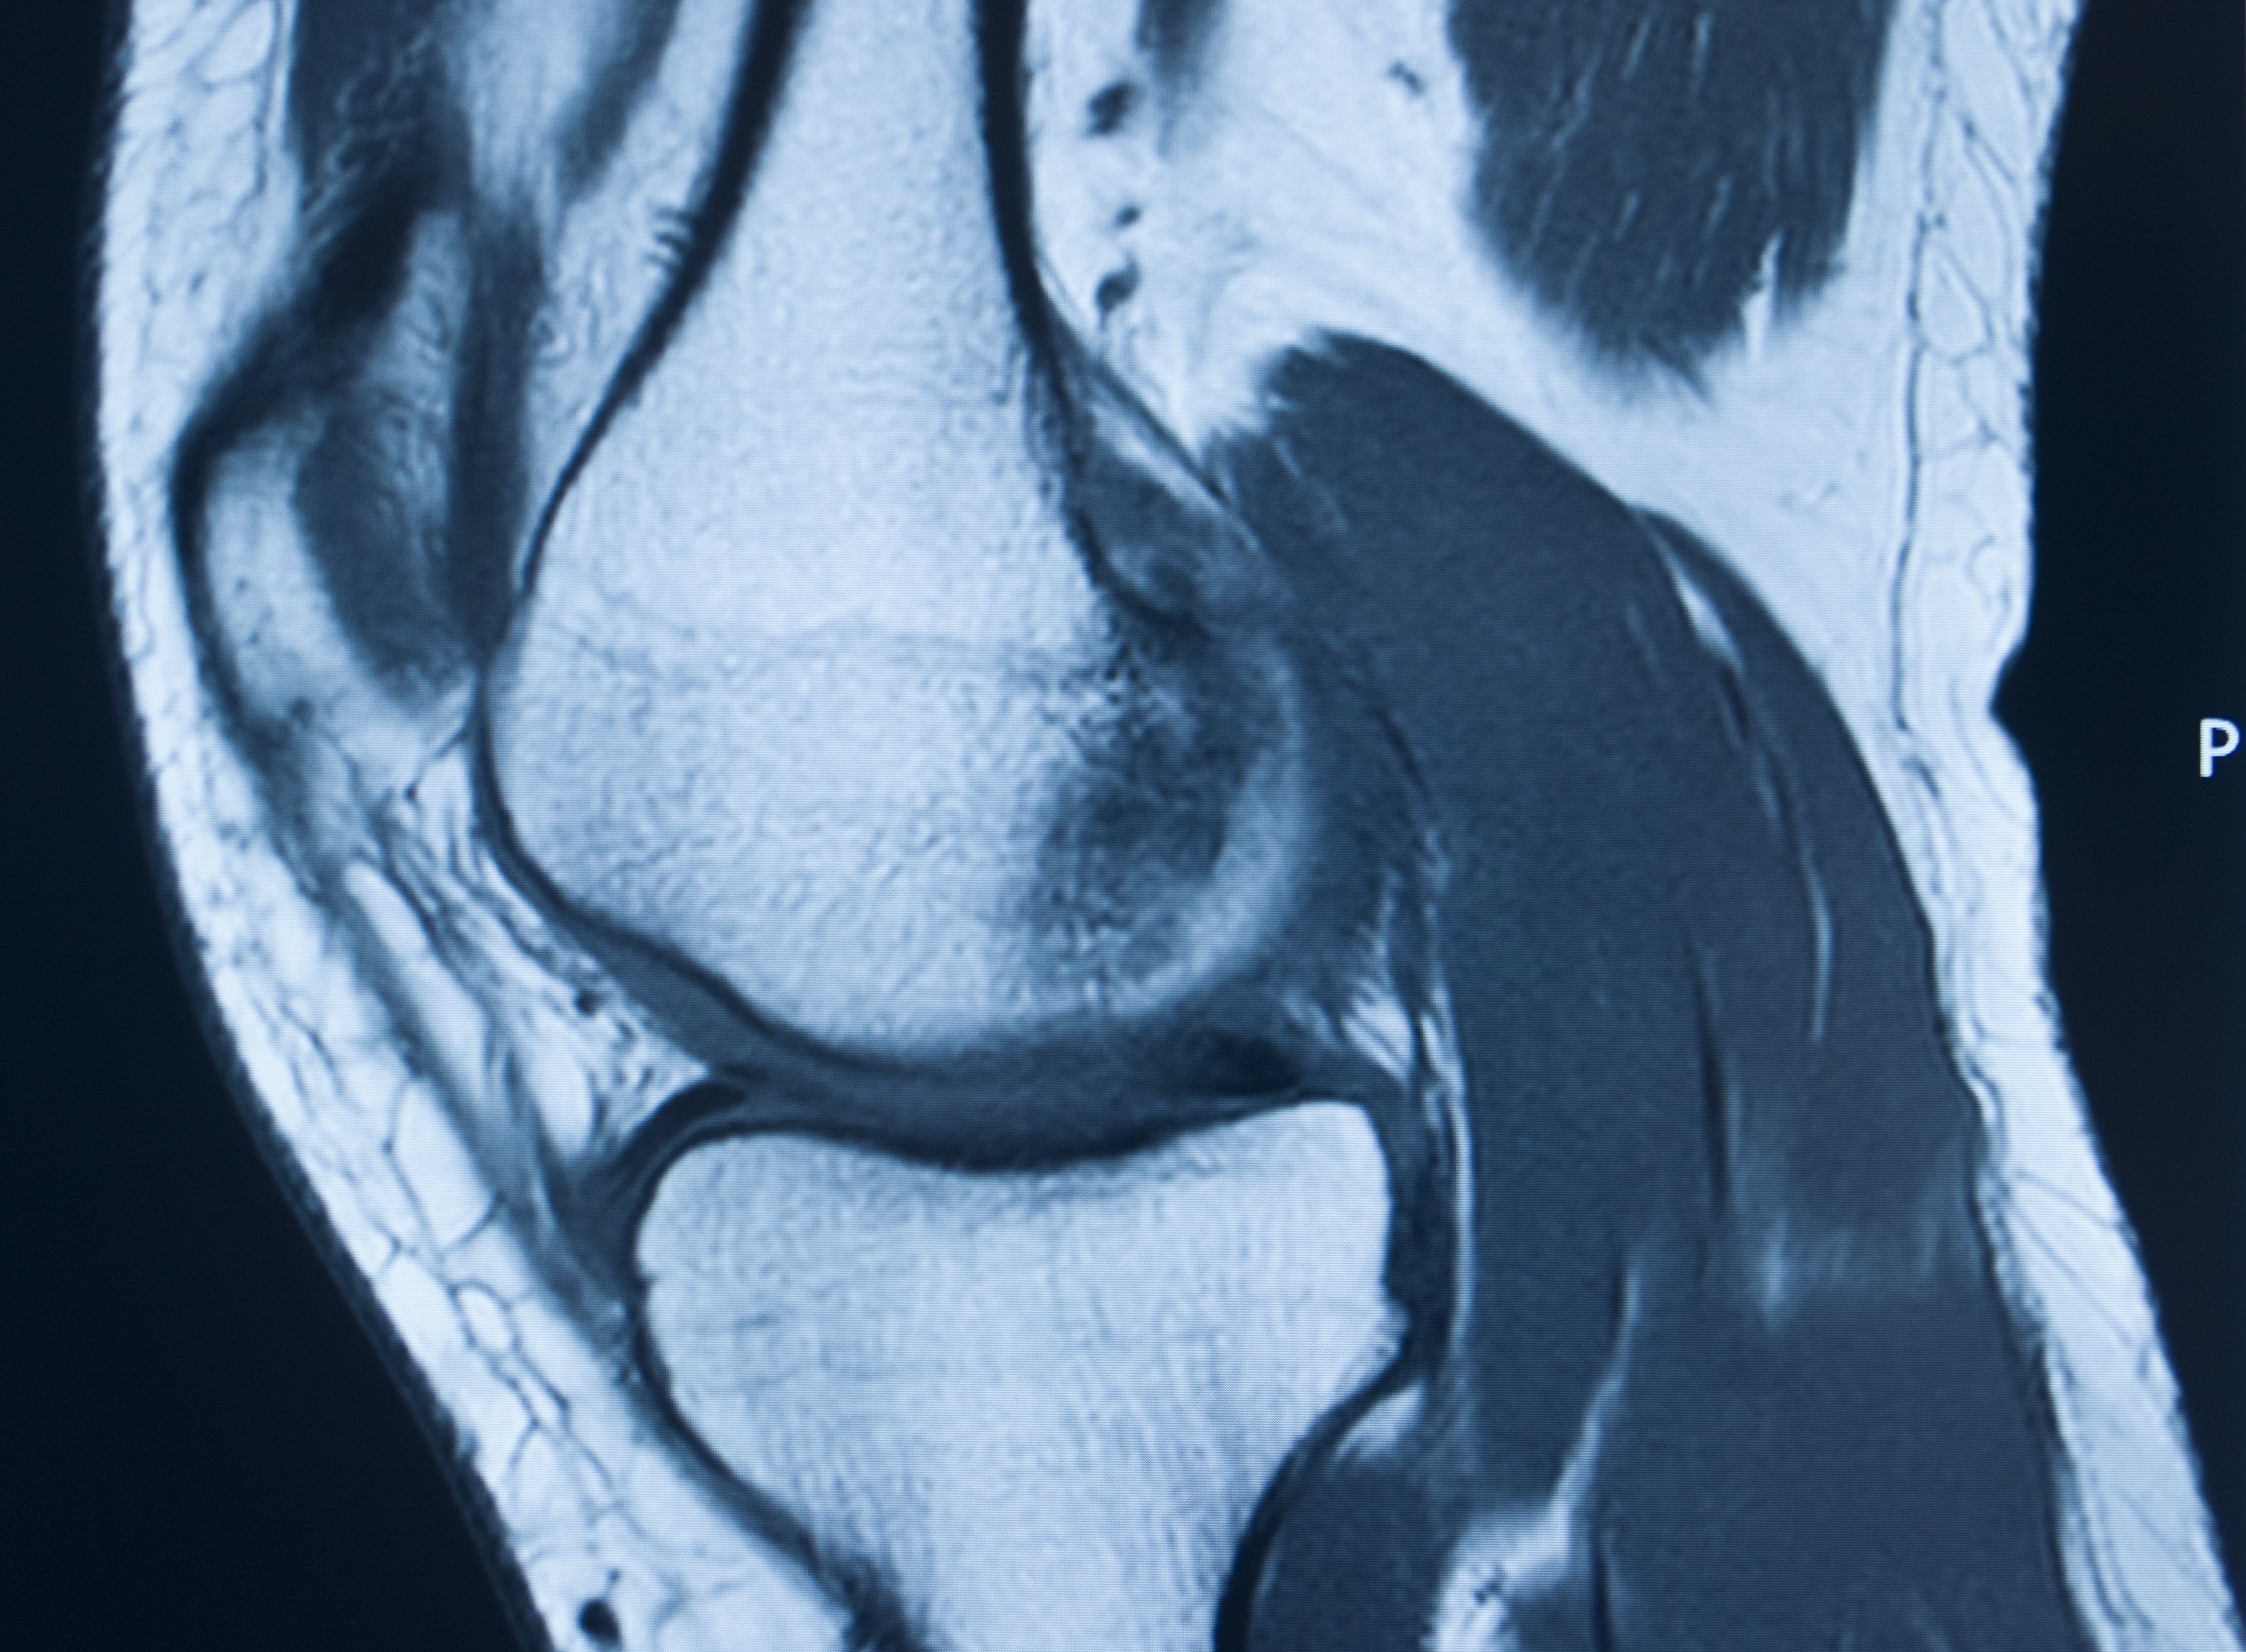 Can I get Social Security Disability for my medial cruciate ligament (MCL) tear?